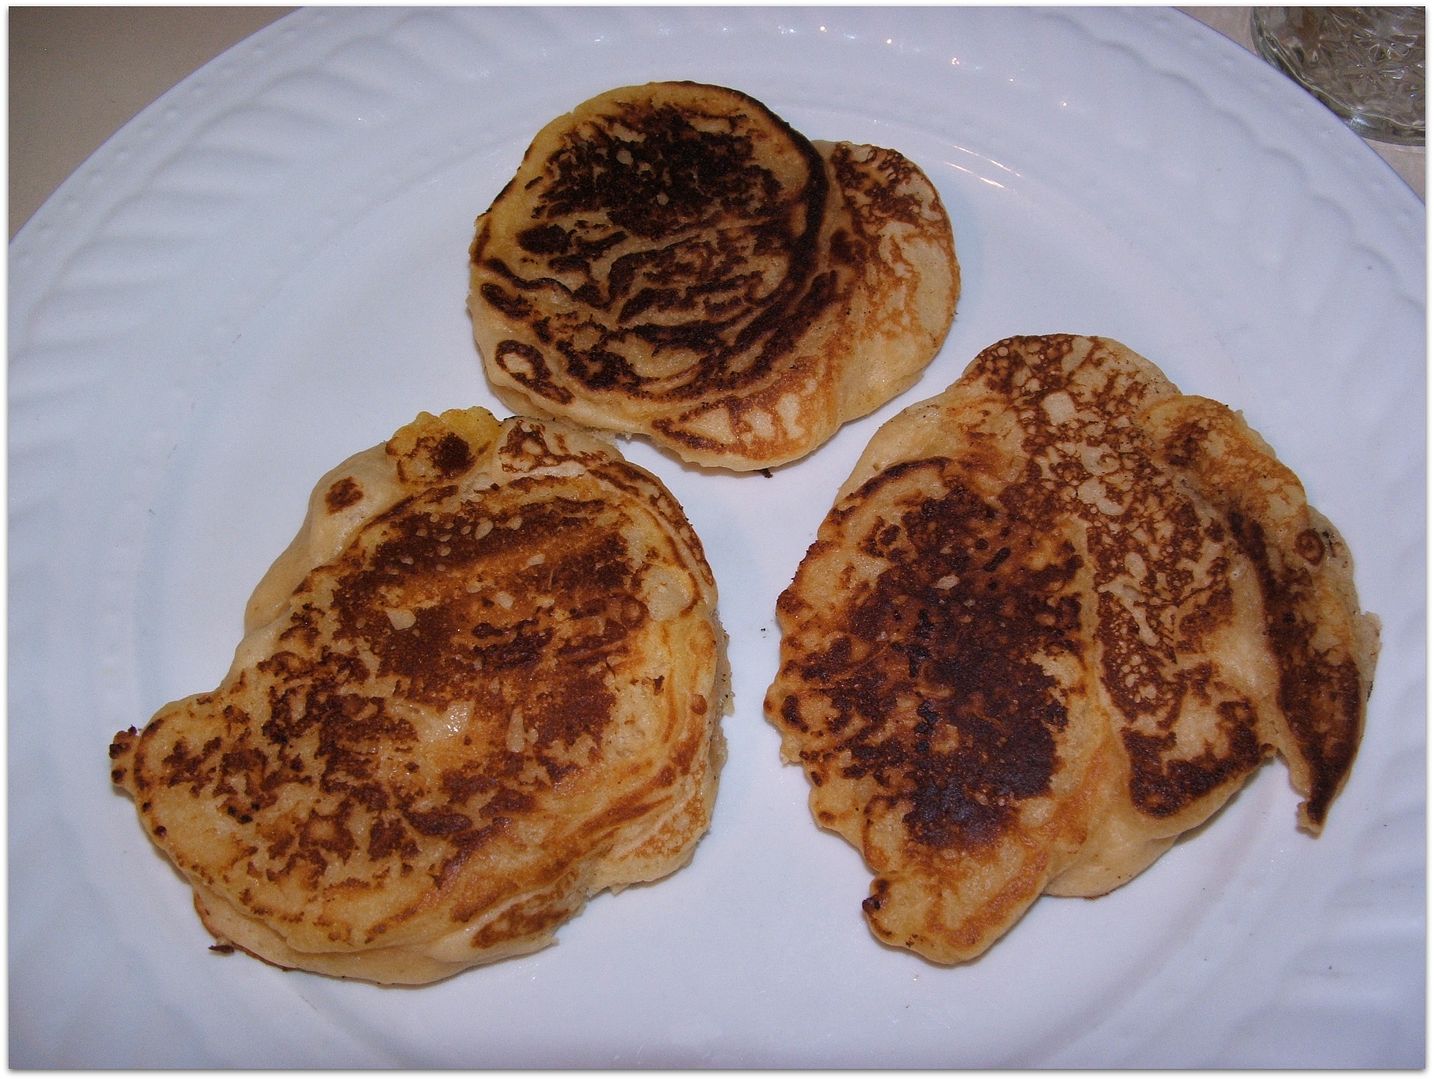 Peanut Butter Pancakes with Grape Syrup by Angie Ouellette-Tower photo 008_zps5f911230.jpg